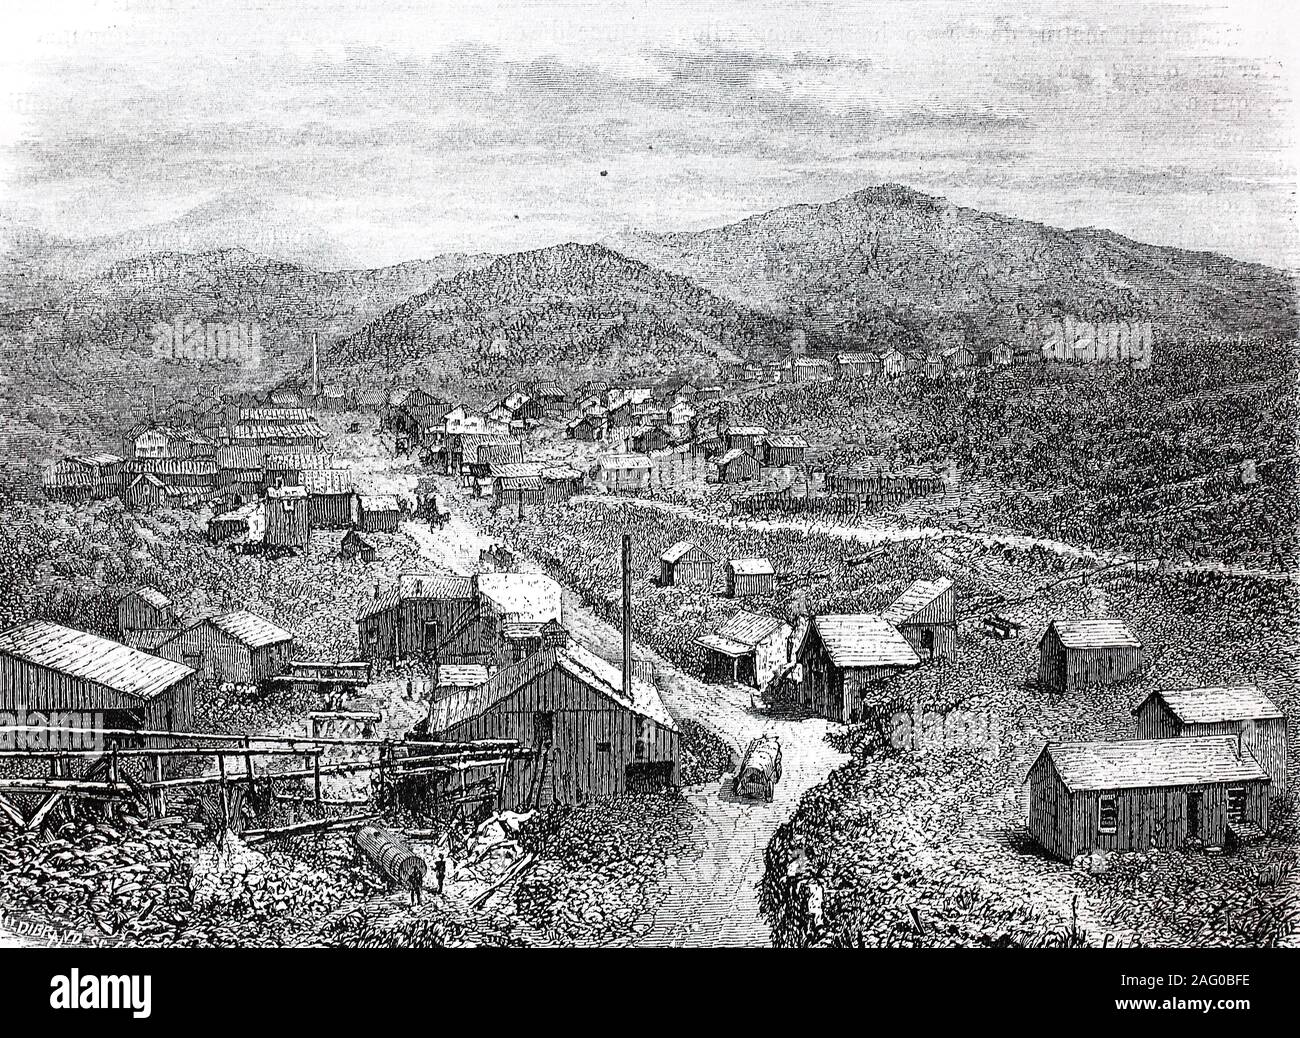 Silver City in the mountainous area of central Tulare County, California  /  , Reproduction of an original print from the 19th century, digital improved / Reproduktion einer Vorlage aus dem 19. Jahrhundert, digital verbessert Stock Photo